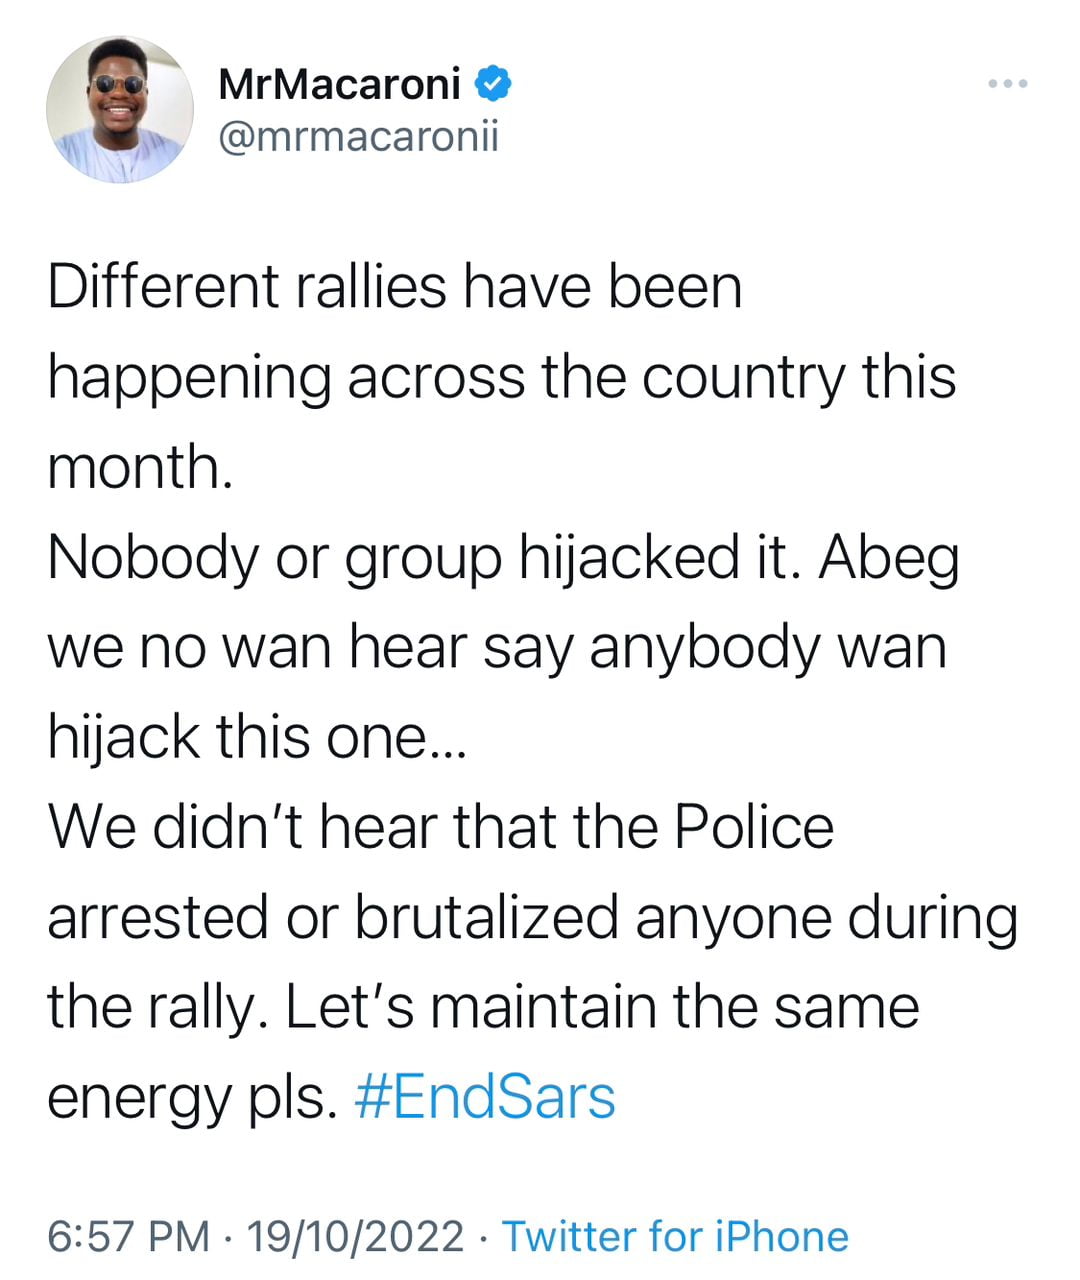 EndSARS Memorial: We will never forget - Youths Vow as they mark 2 year anniversary